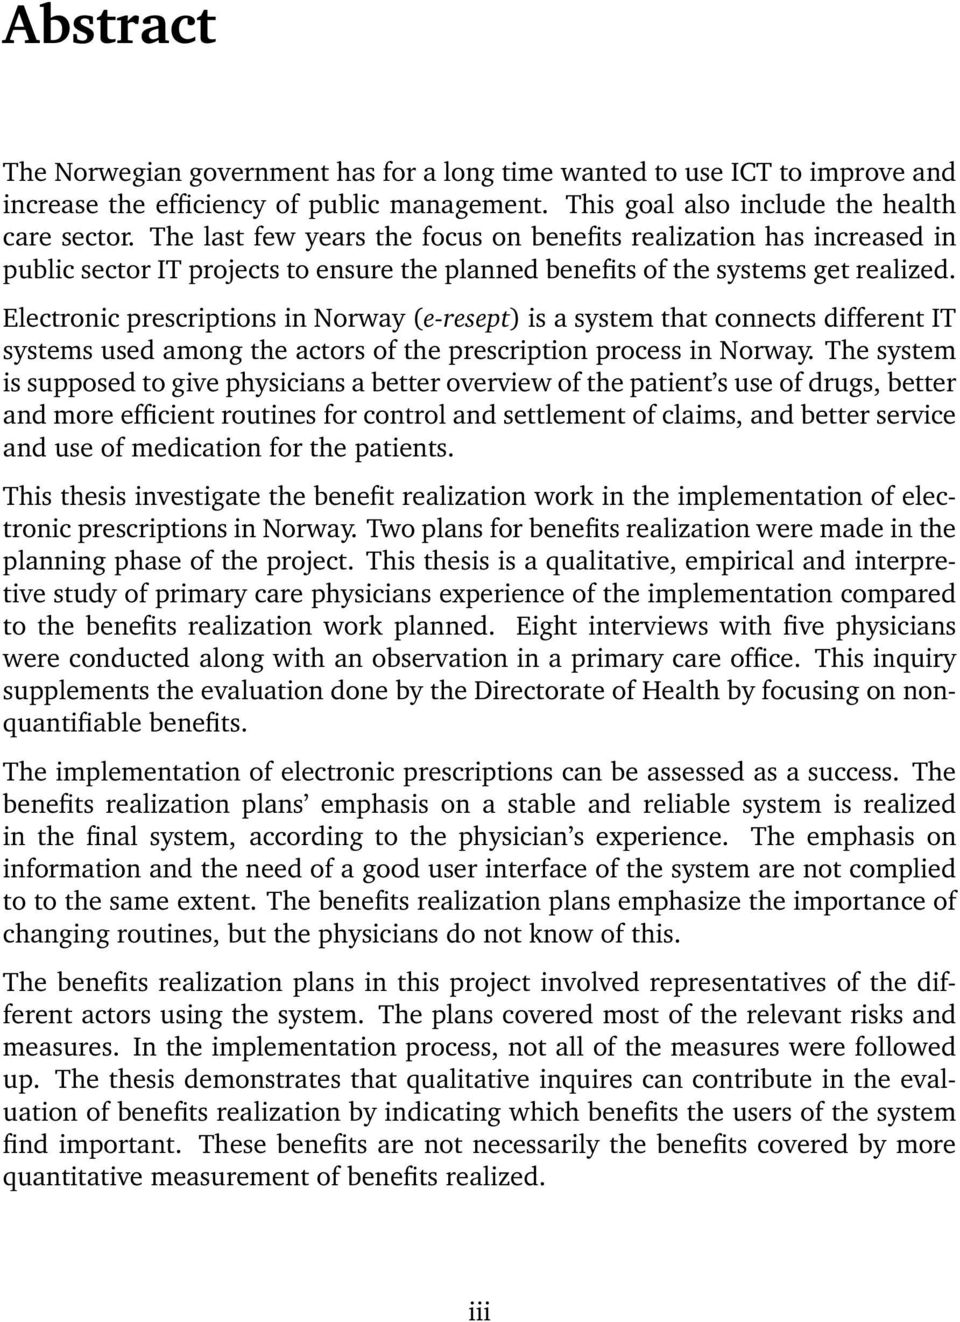 Electronic prescriptions in Norway (e-resept) is a system that connects different IT systems used among the actors of the prescription process in Norway.